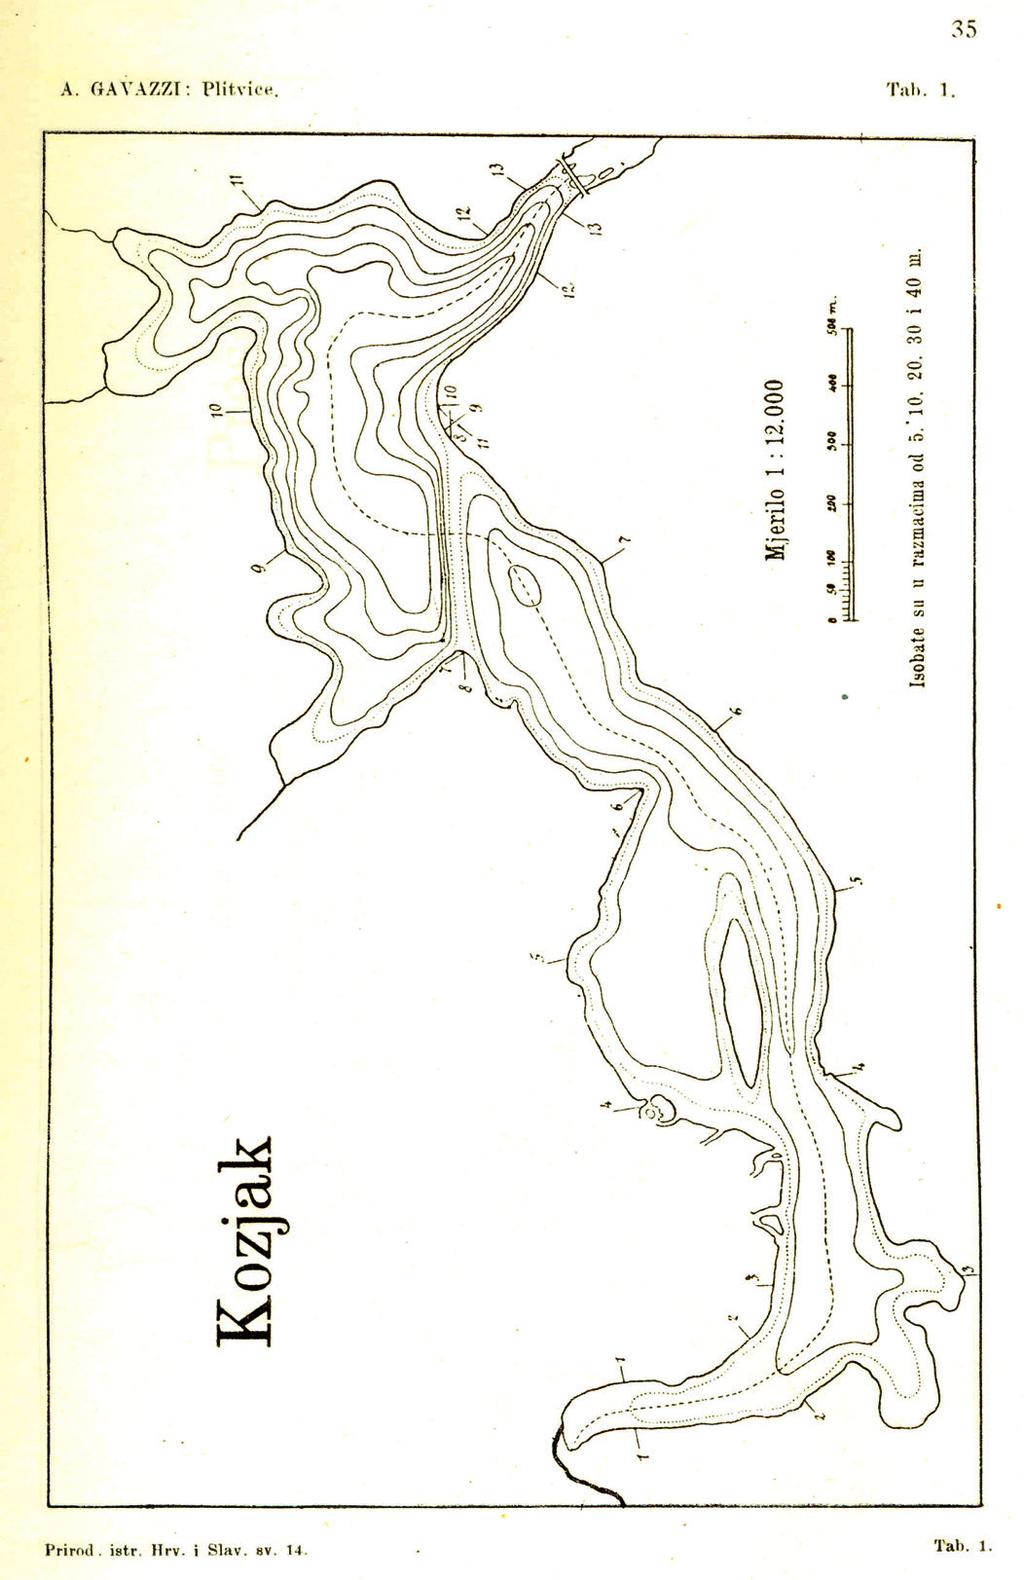 During a multiyear (1951 1954) observational study of Plitvice Lakes that was financed by the PLNP, Petrik (1958) performed approximately 5400 measurements of lake depths, and afterwards, based on